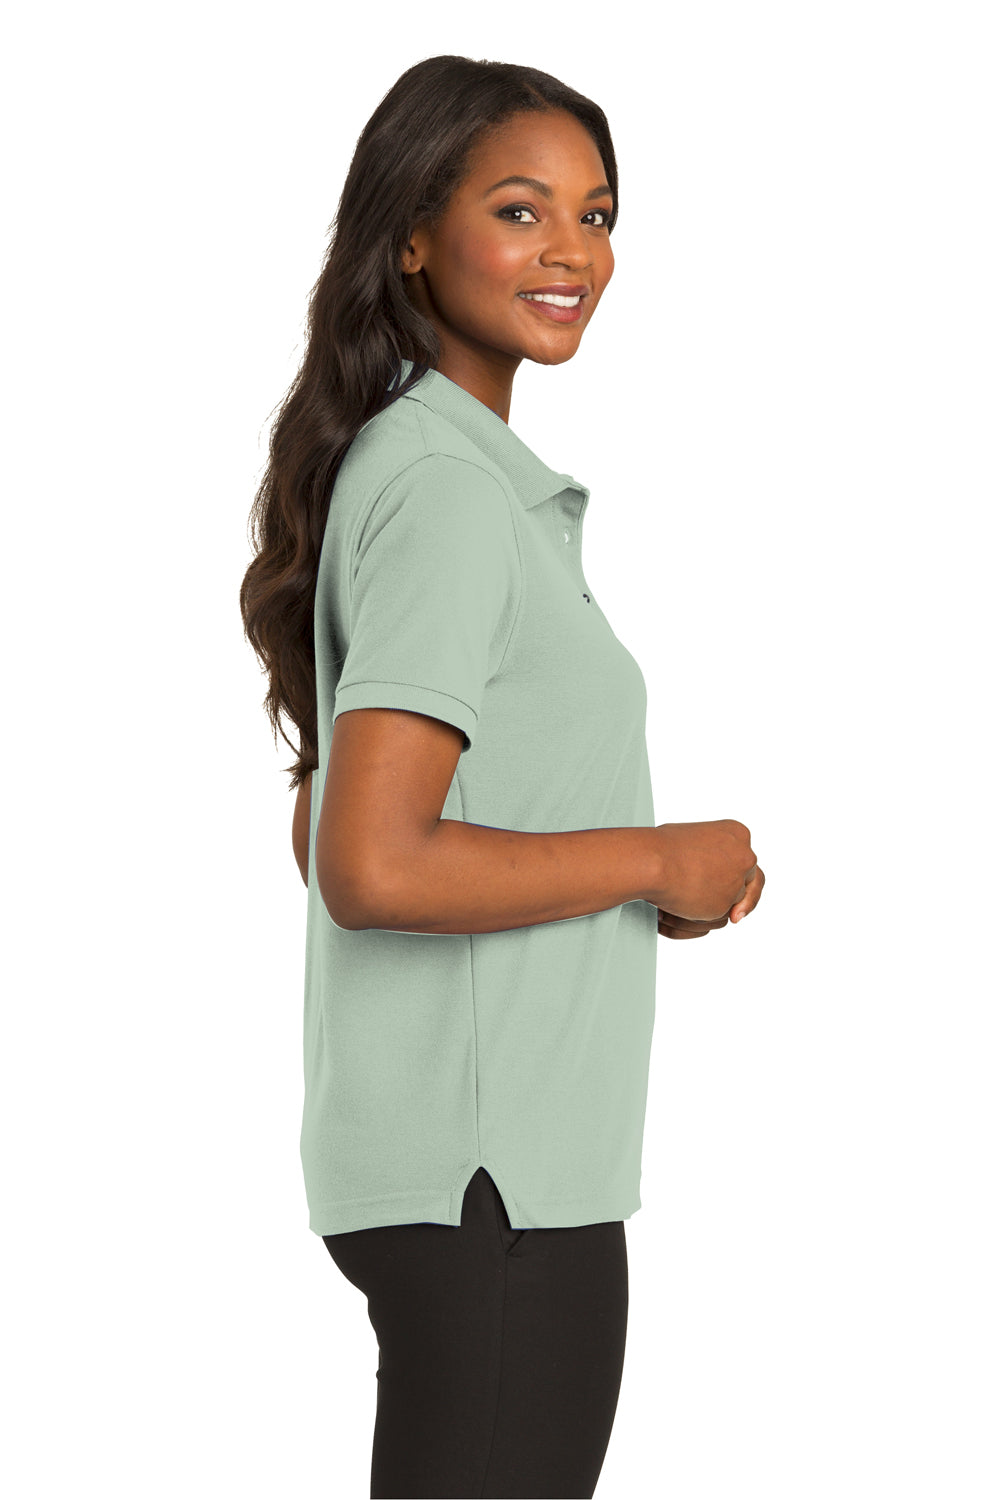 Port Authority L500 Womens Silk Touch Wrinkle Resistant Short Sleeve Polo Shirt Mint Green Side